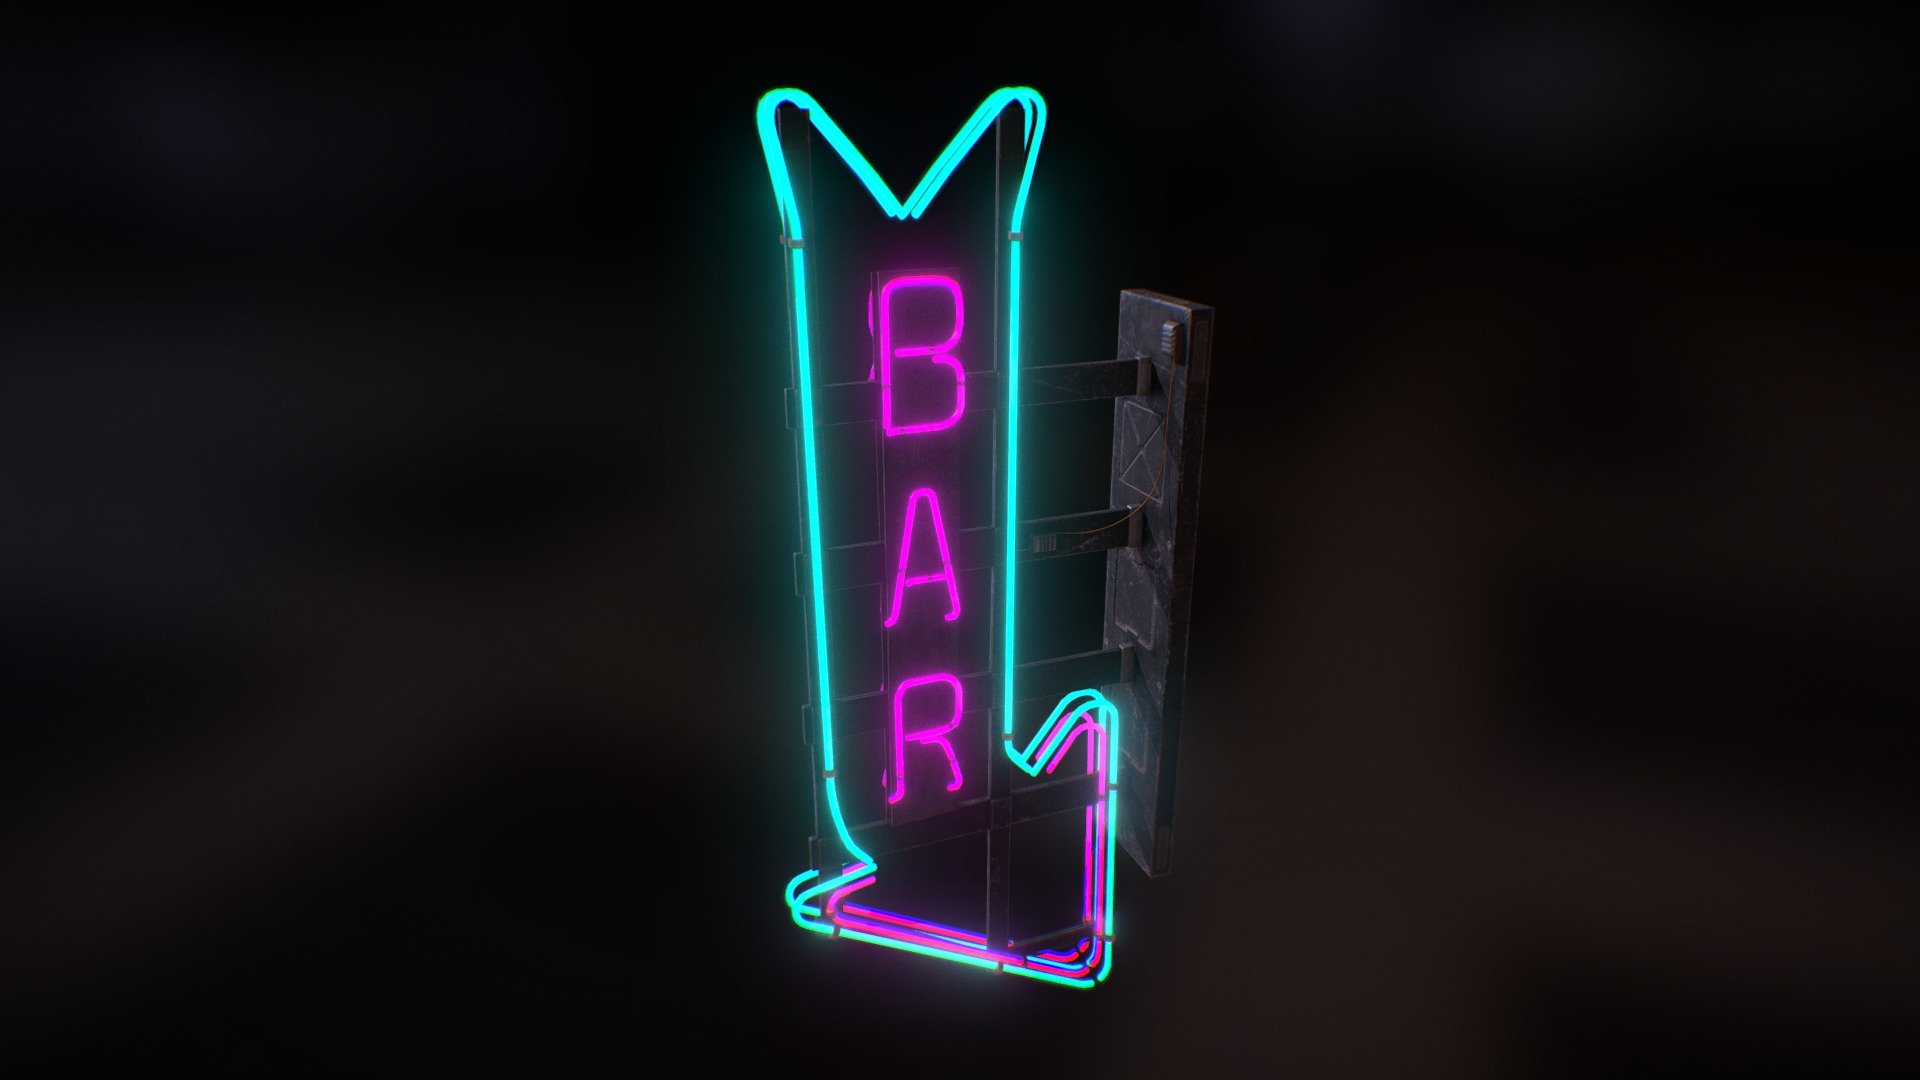 A model of a neon bar sign, useful for many exterior or interior scenarios. 4K texture, albedo, metalness, roughness, normal, opacity, emission, AO. 8,698 polys, 17,568 tris, 9,022 verts. Will include textures set up for unreal engine as seperate file 3d model